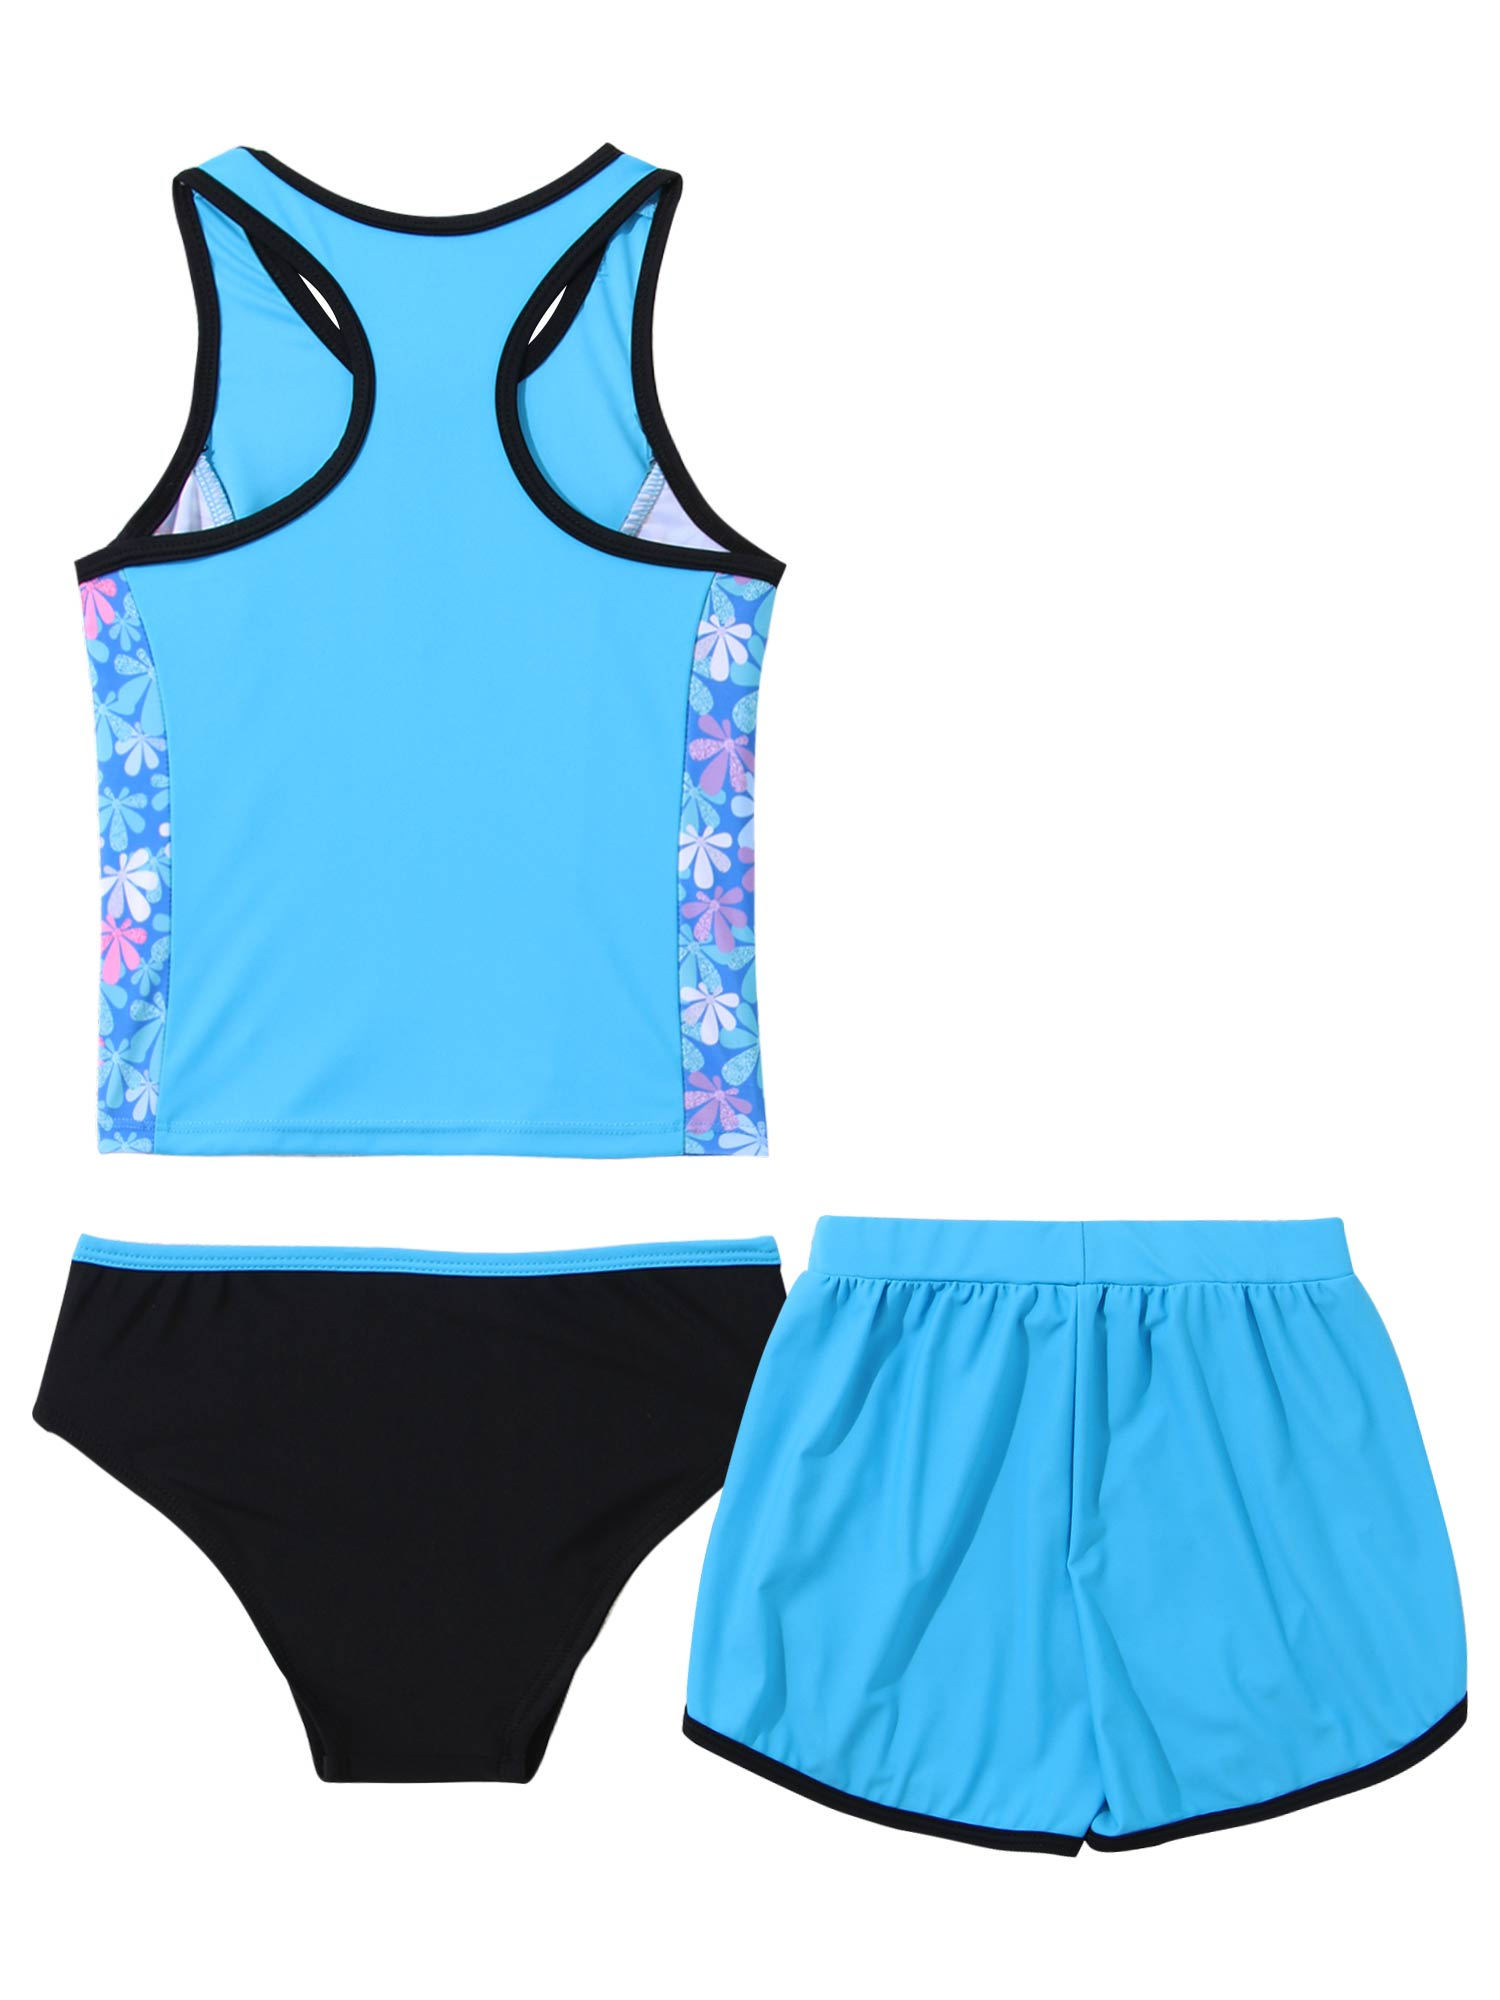 YEAHDOR 3Pcs Little Girls Swimsuit Youth Girls Racer Back Tops with ...